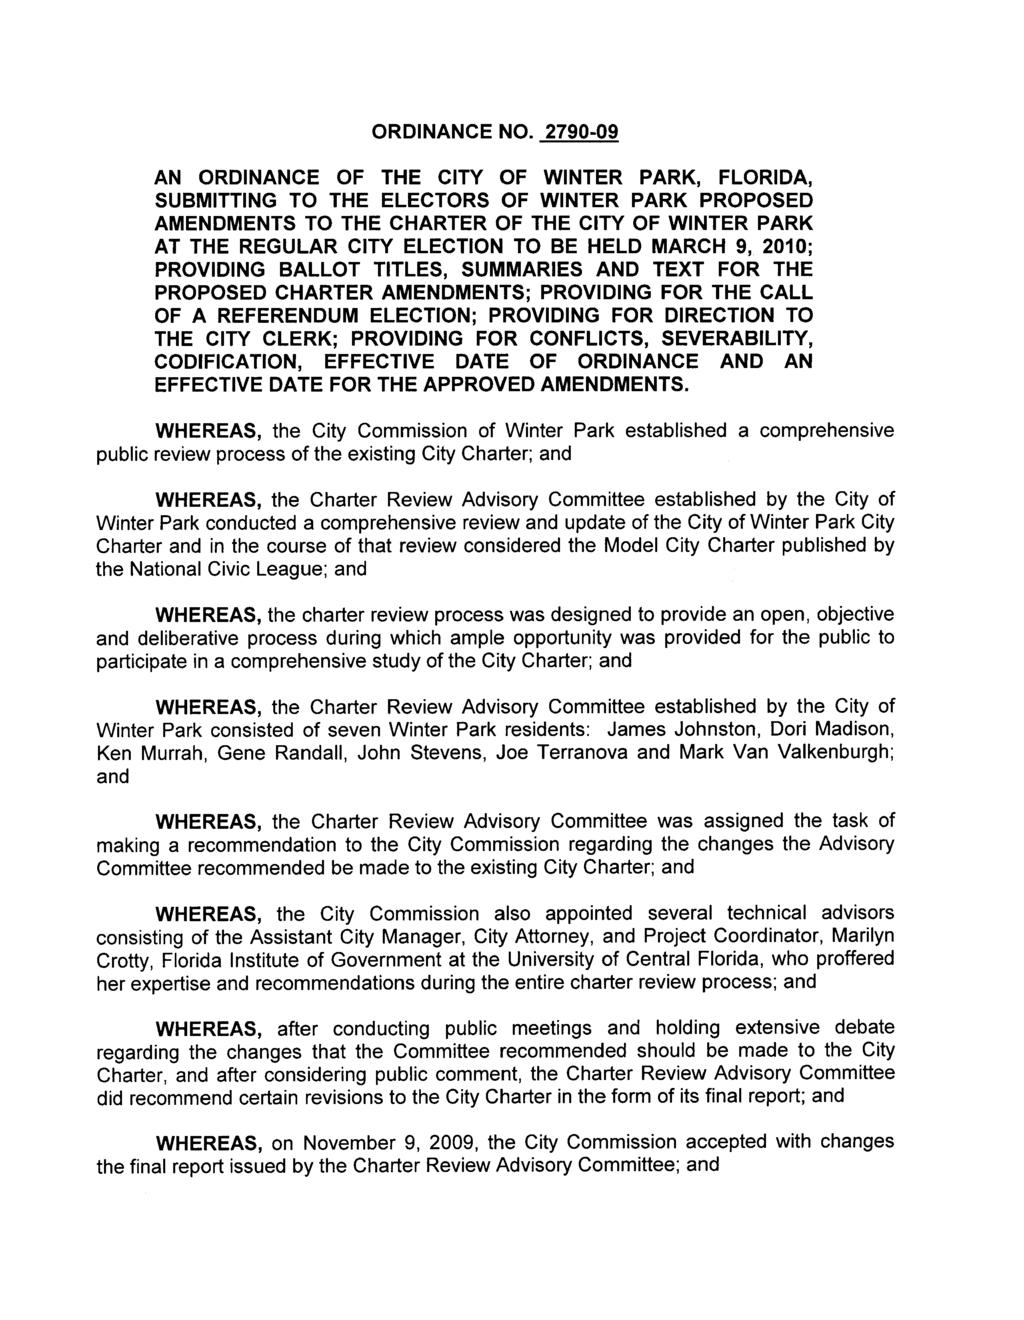 ORDINANCE NO 2790 09 AN ORDINANCE OF THE CITY OF WINTER PARK FLORIDA SUBMITTING TO THE ELECTORS OF WINTER PARK PROPOSED AMENDMENTS TO THE CHARTER OF THE CITY OF WINTER PARK AT THE REGULAR CITY